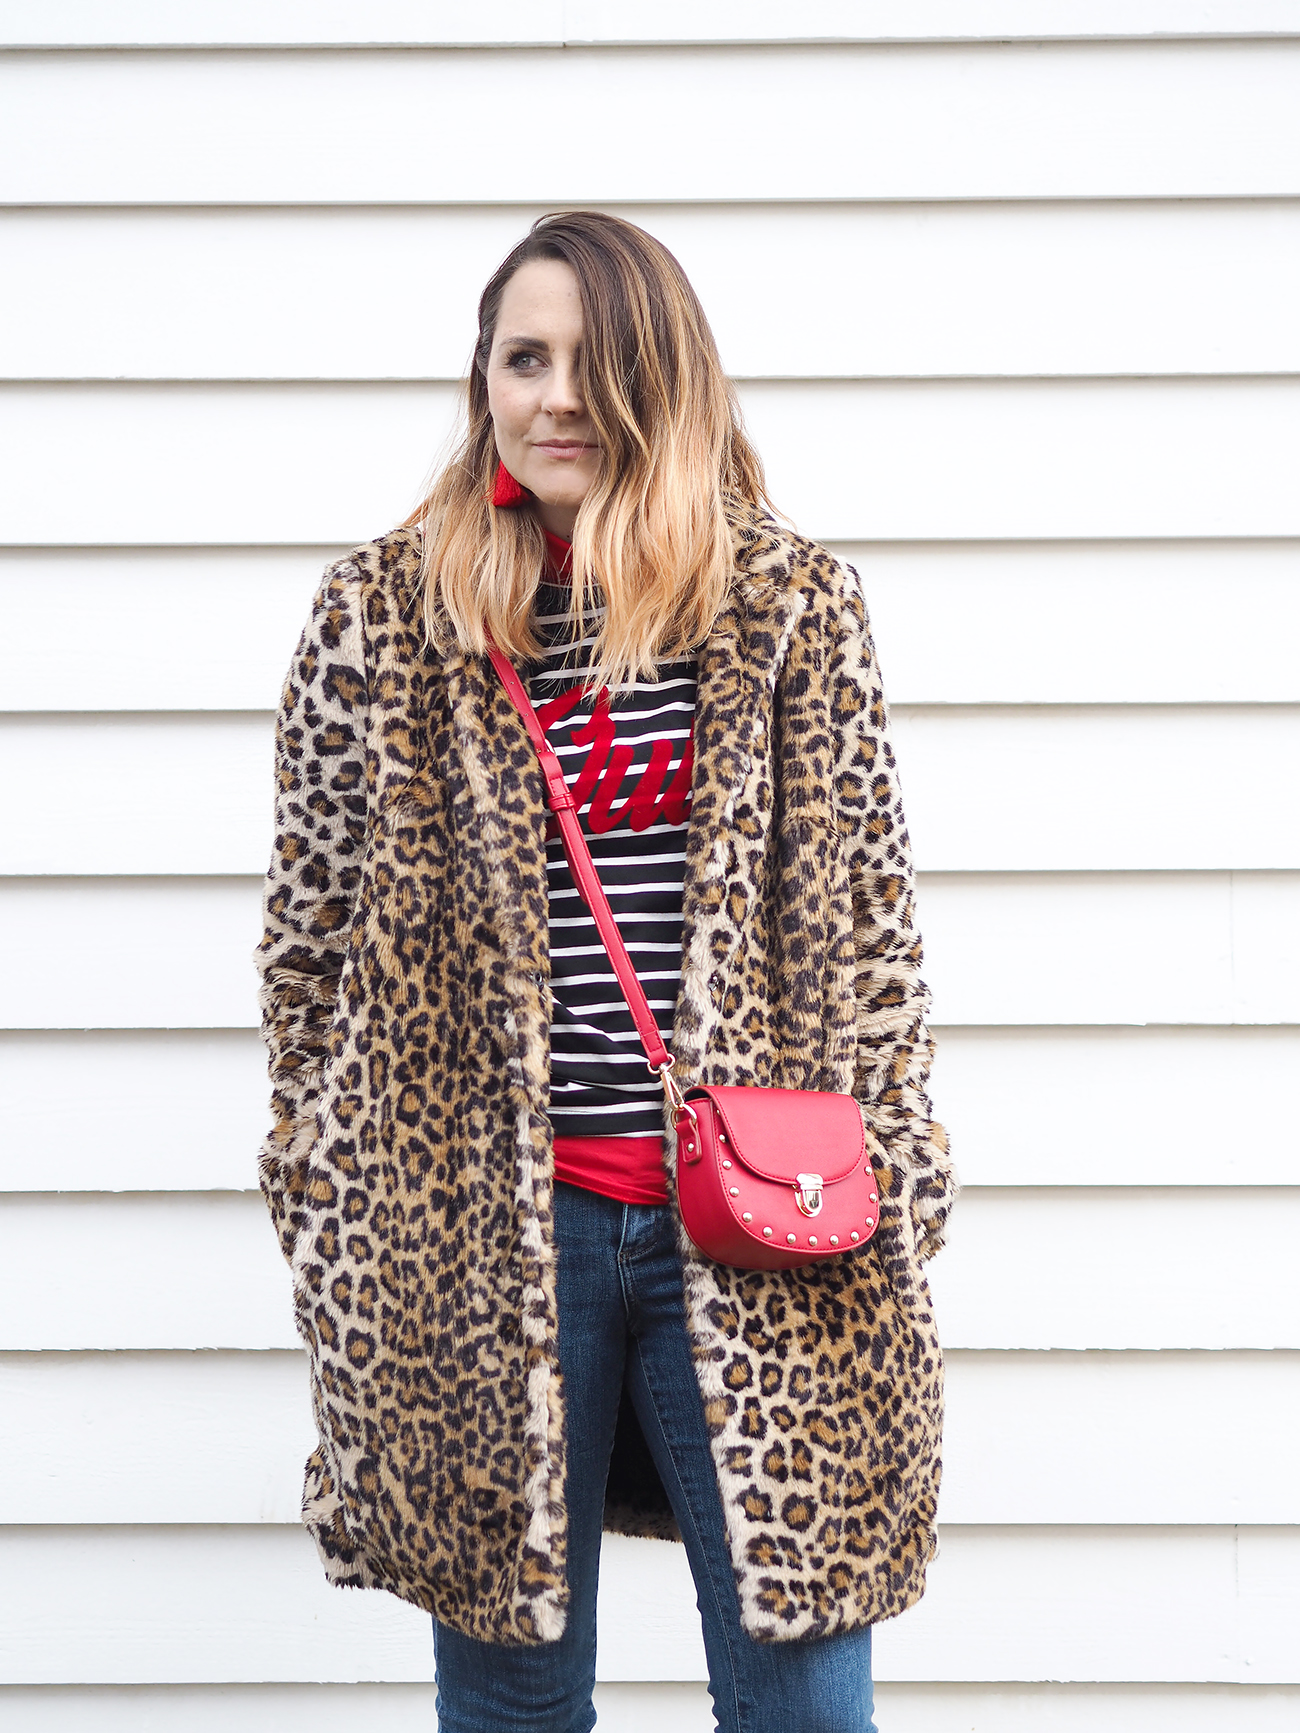 wearing mixed prints leopard and stripes